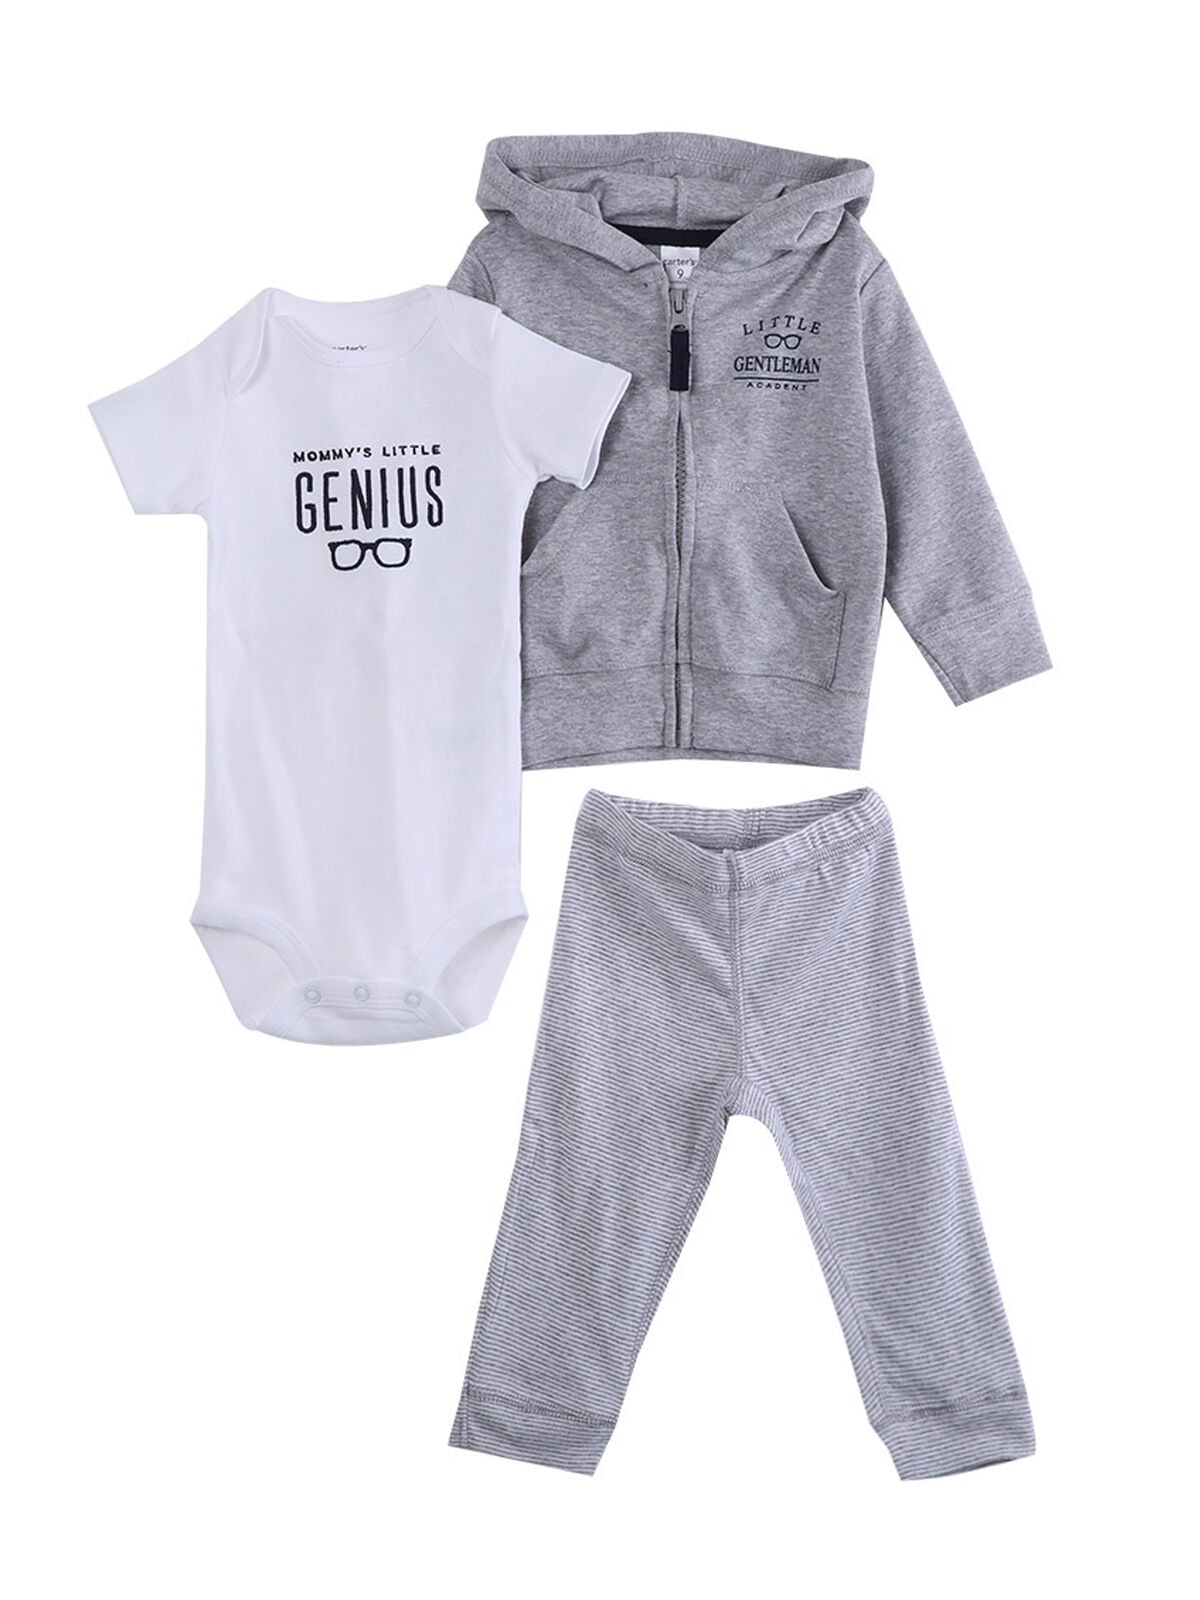 Shorts Clothes Set Cotrio Newborn Baby Boys 2-Pieces Outfit Set Kids Short Sleeves T-Shirt